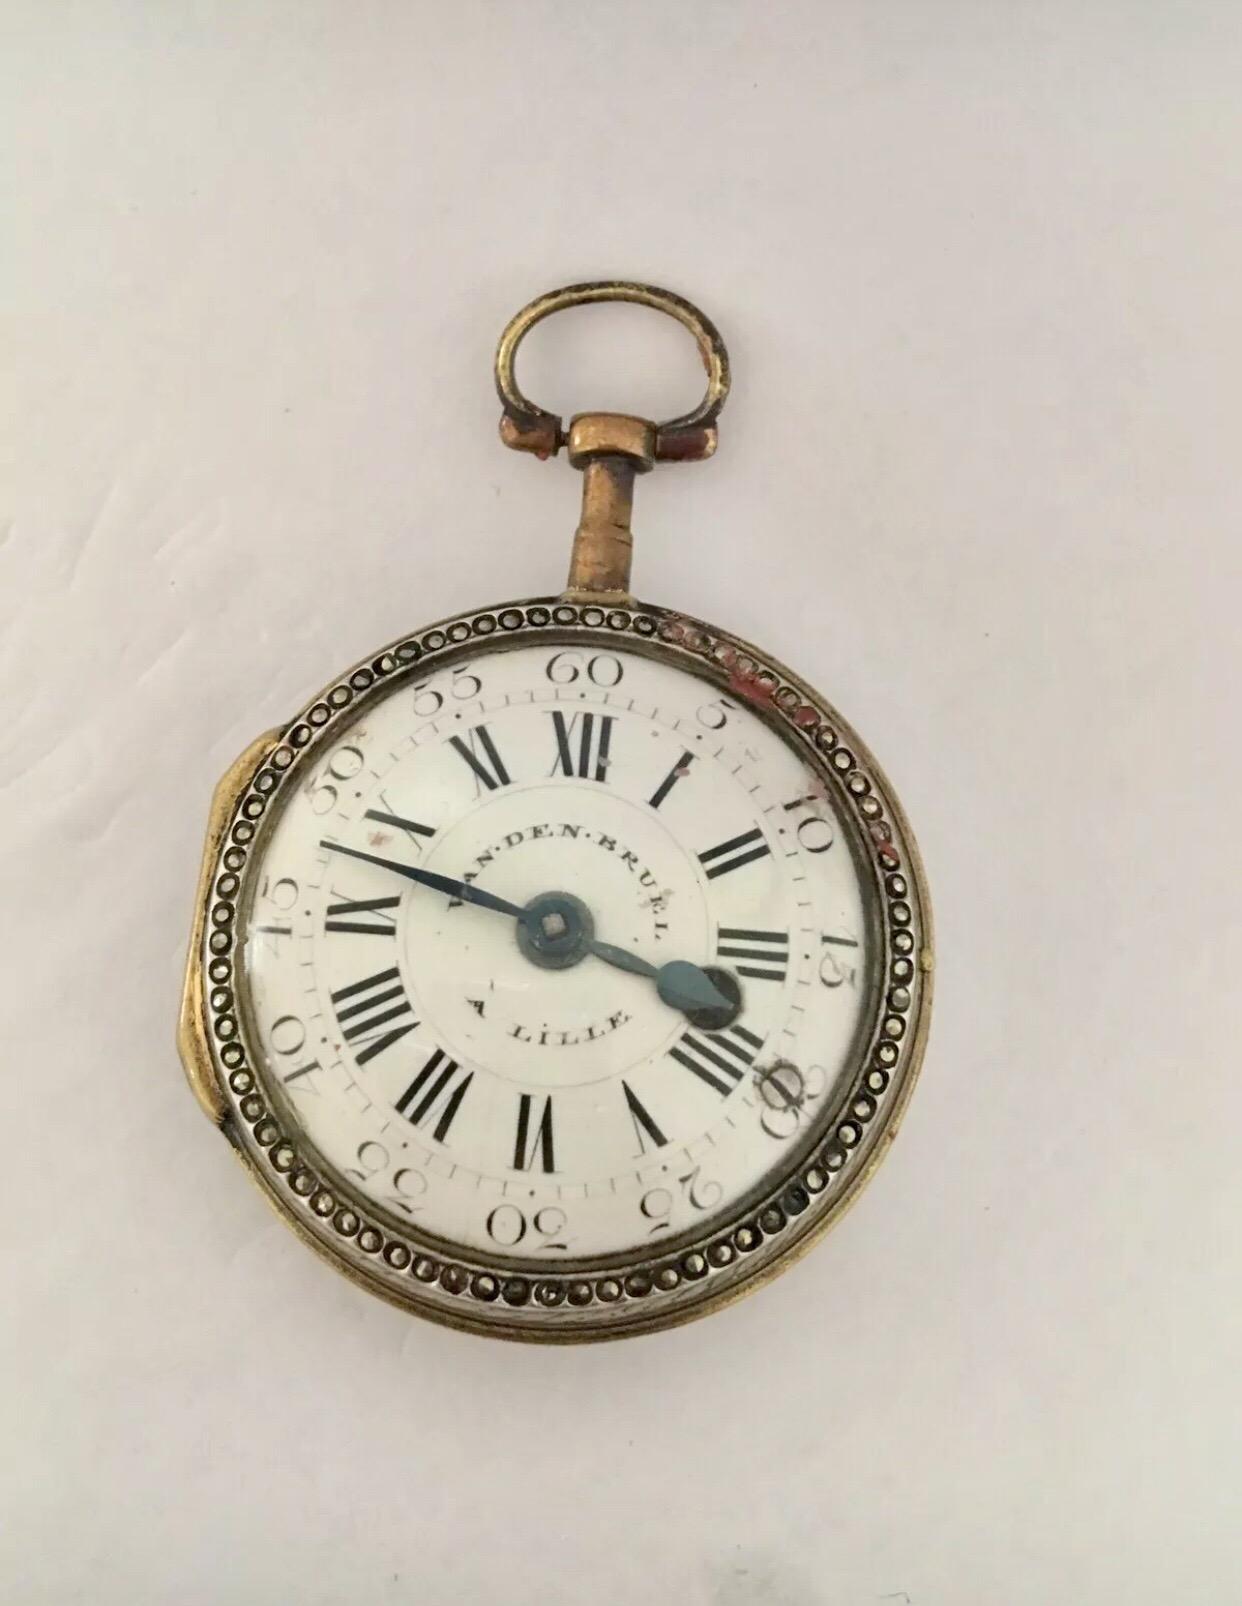 Early Rare Verge Fusee Enamel Pocket Watch Signed Van.Den.Bruel A Lille For Sale 3